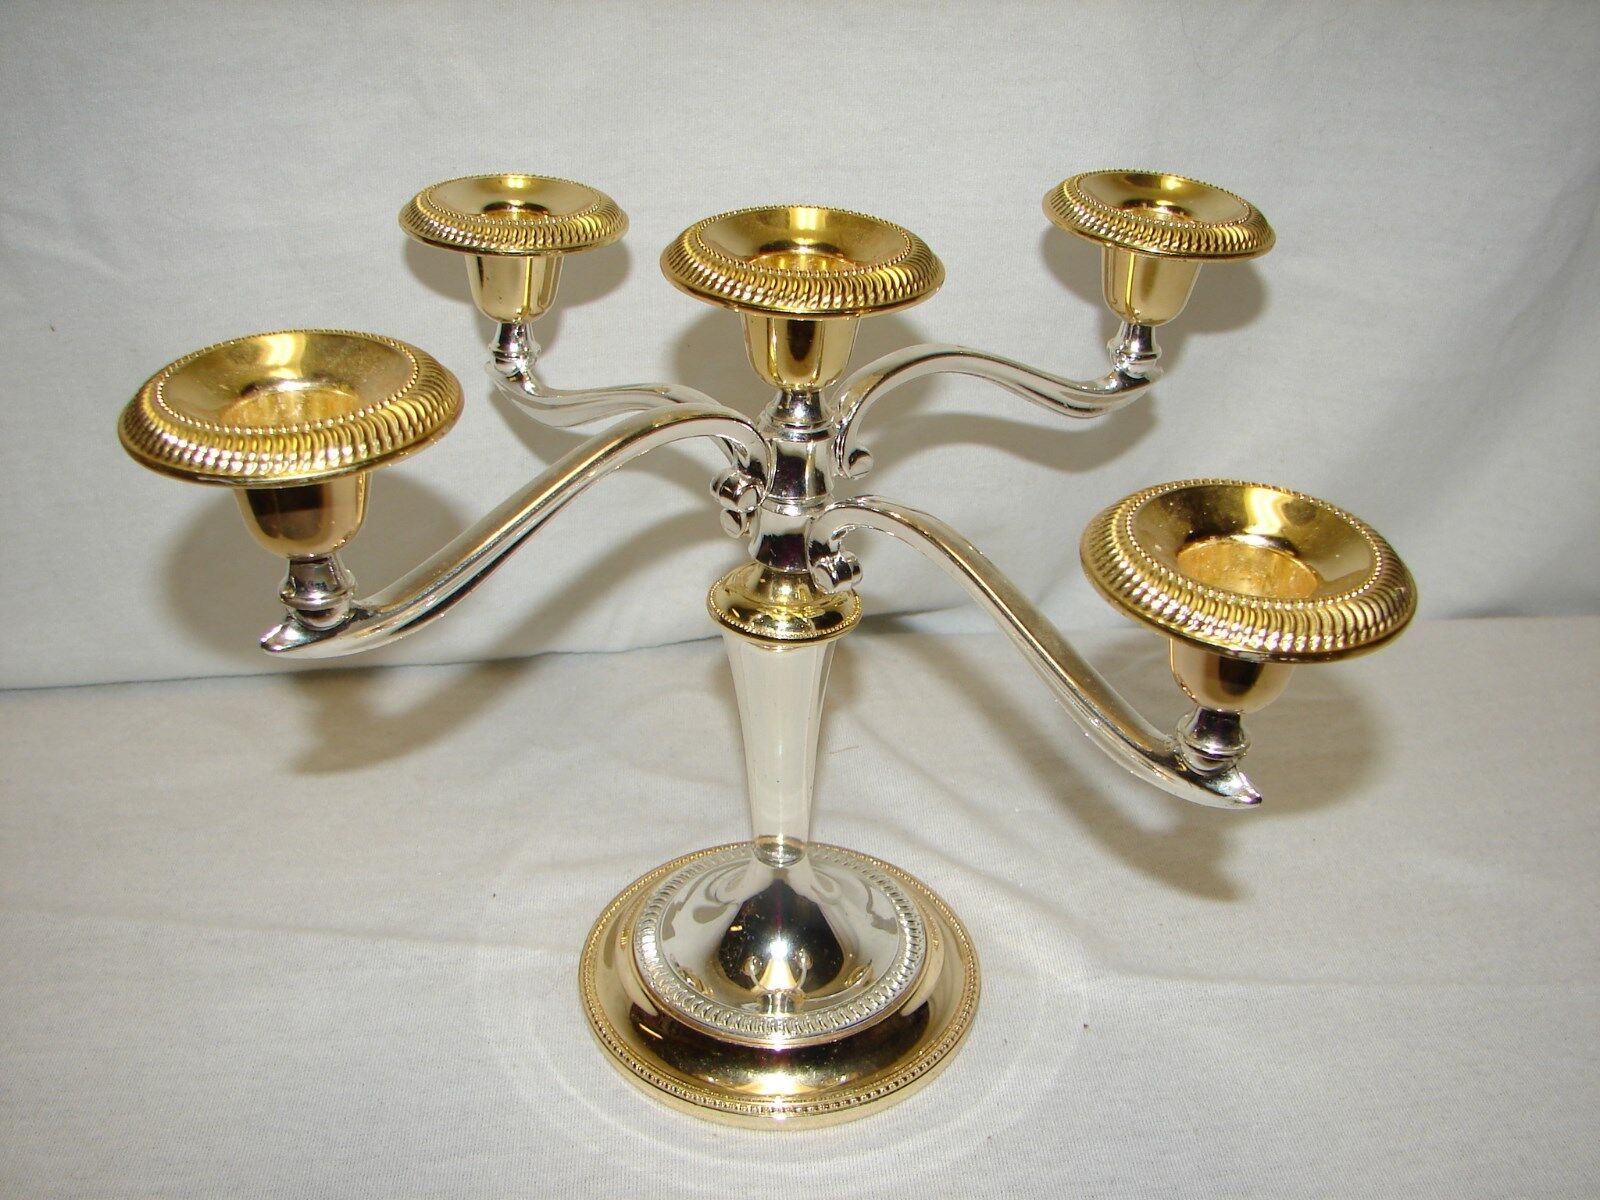 Candelabra ~ Gold and Silver or Silver Plate Candelabra holds 5 candles ~ nice